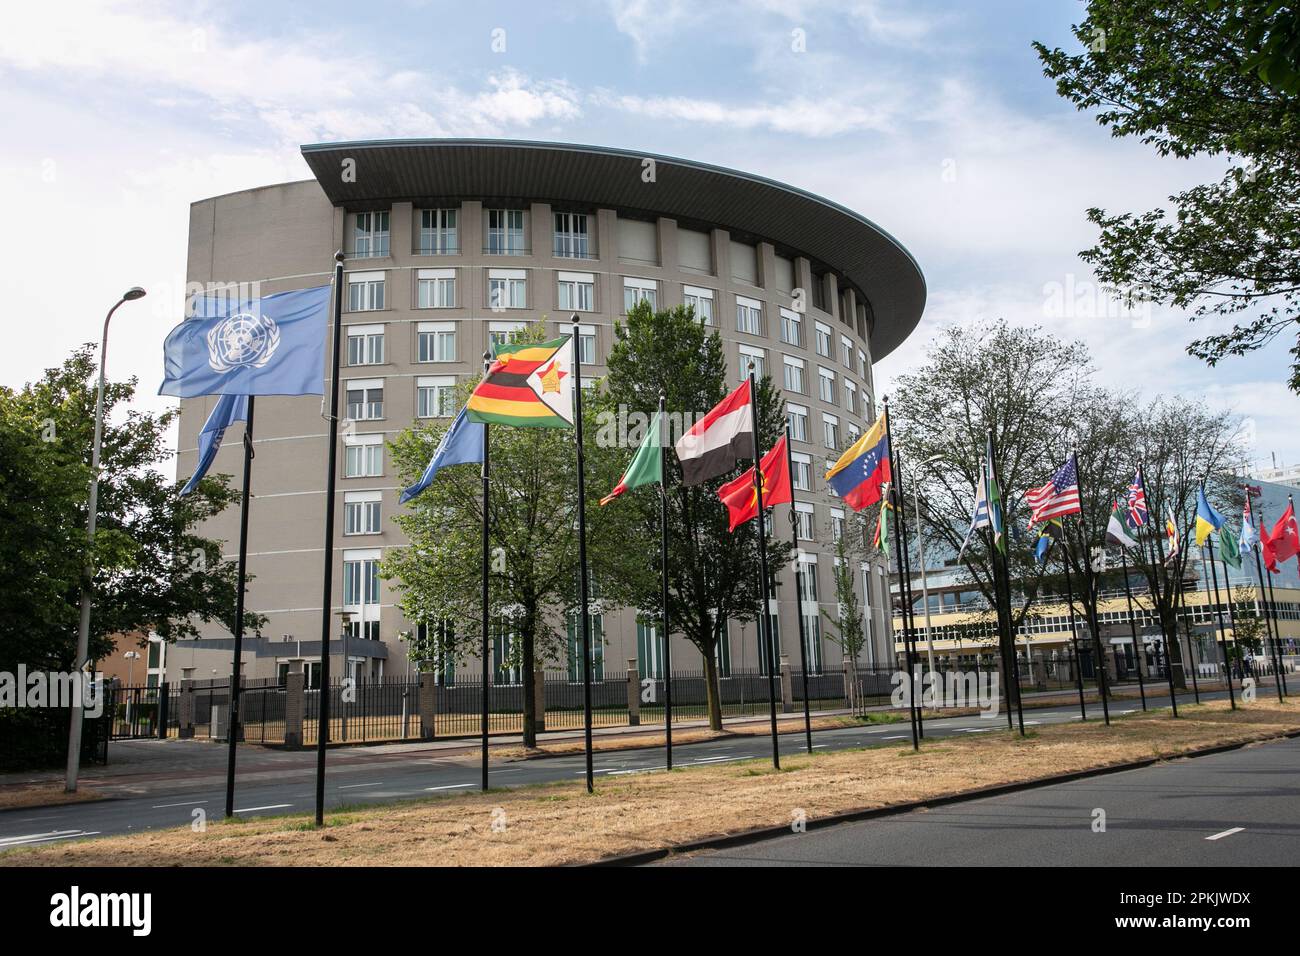 20.07.2018. Den Haag, NL. Exterior view of the Organisation for the Prohibition of Chemical Weapons (OPCW) in The Hague, Netherlands.  Credit: Ant Pal Stock Photo